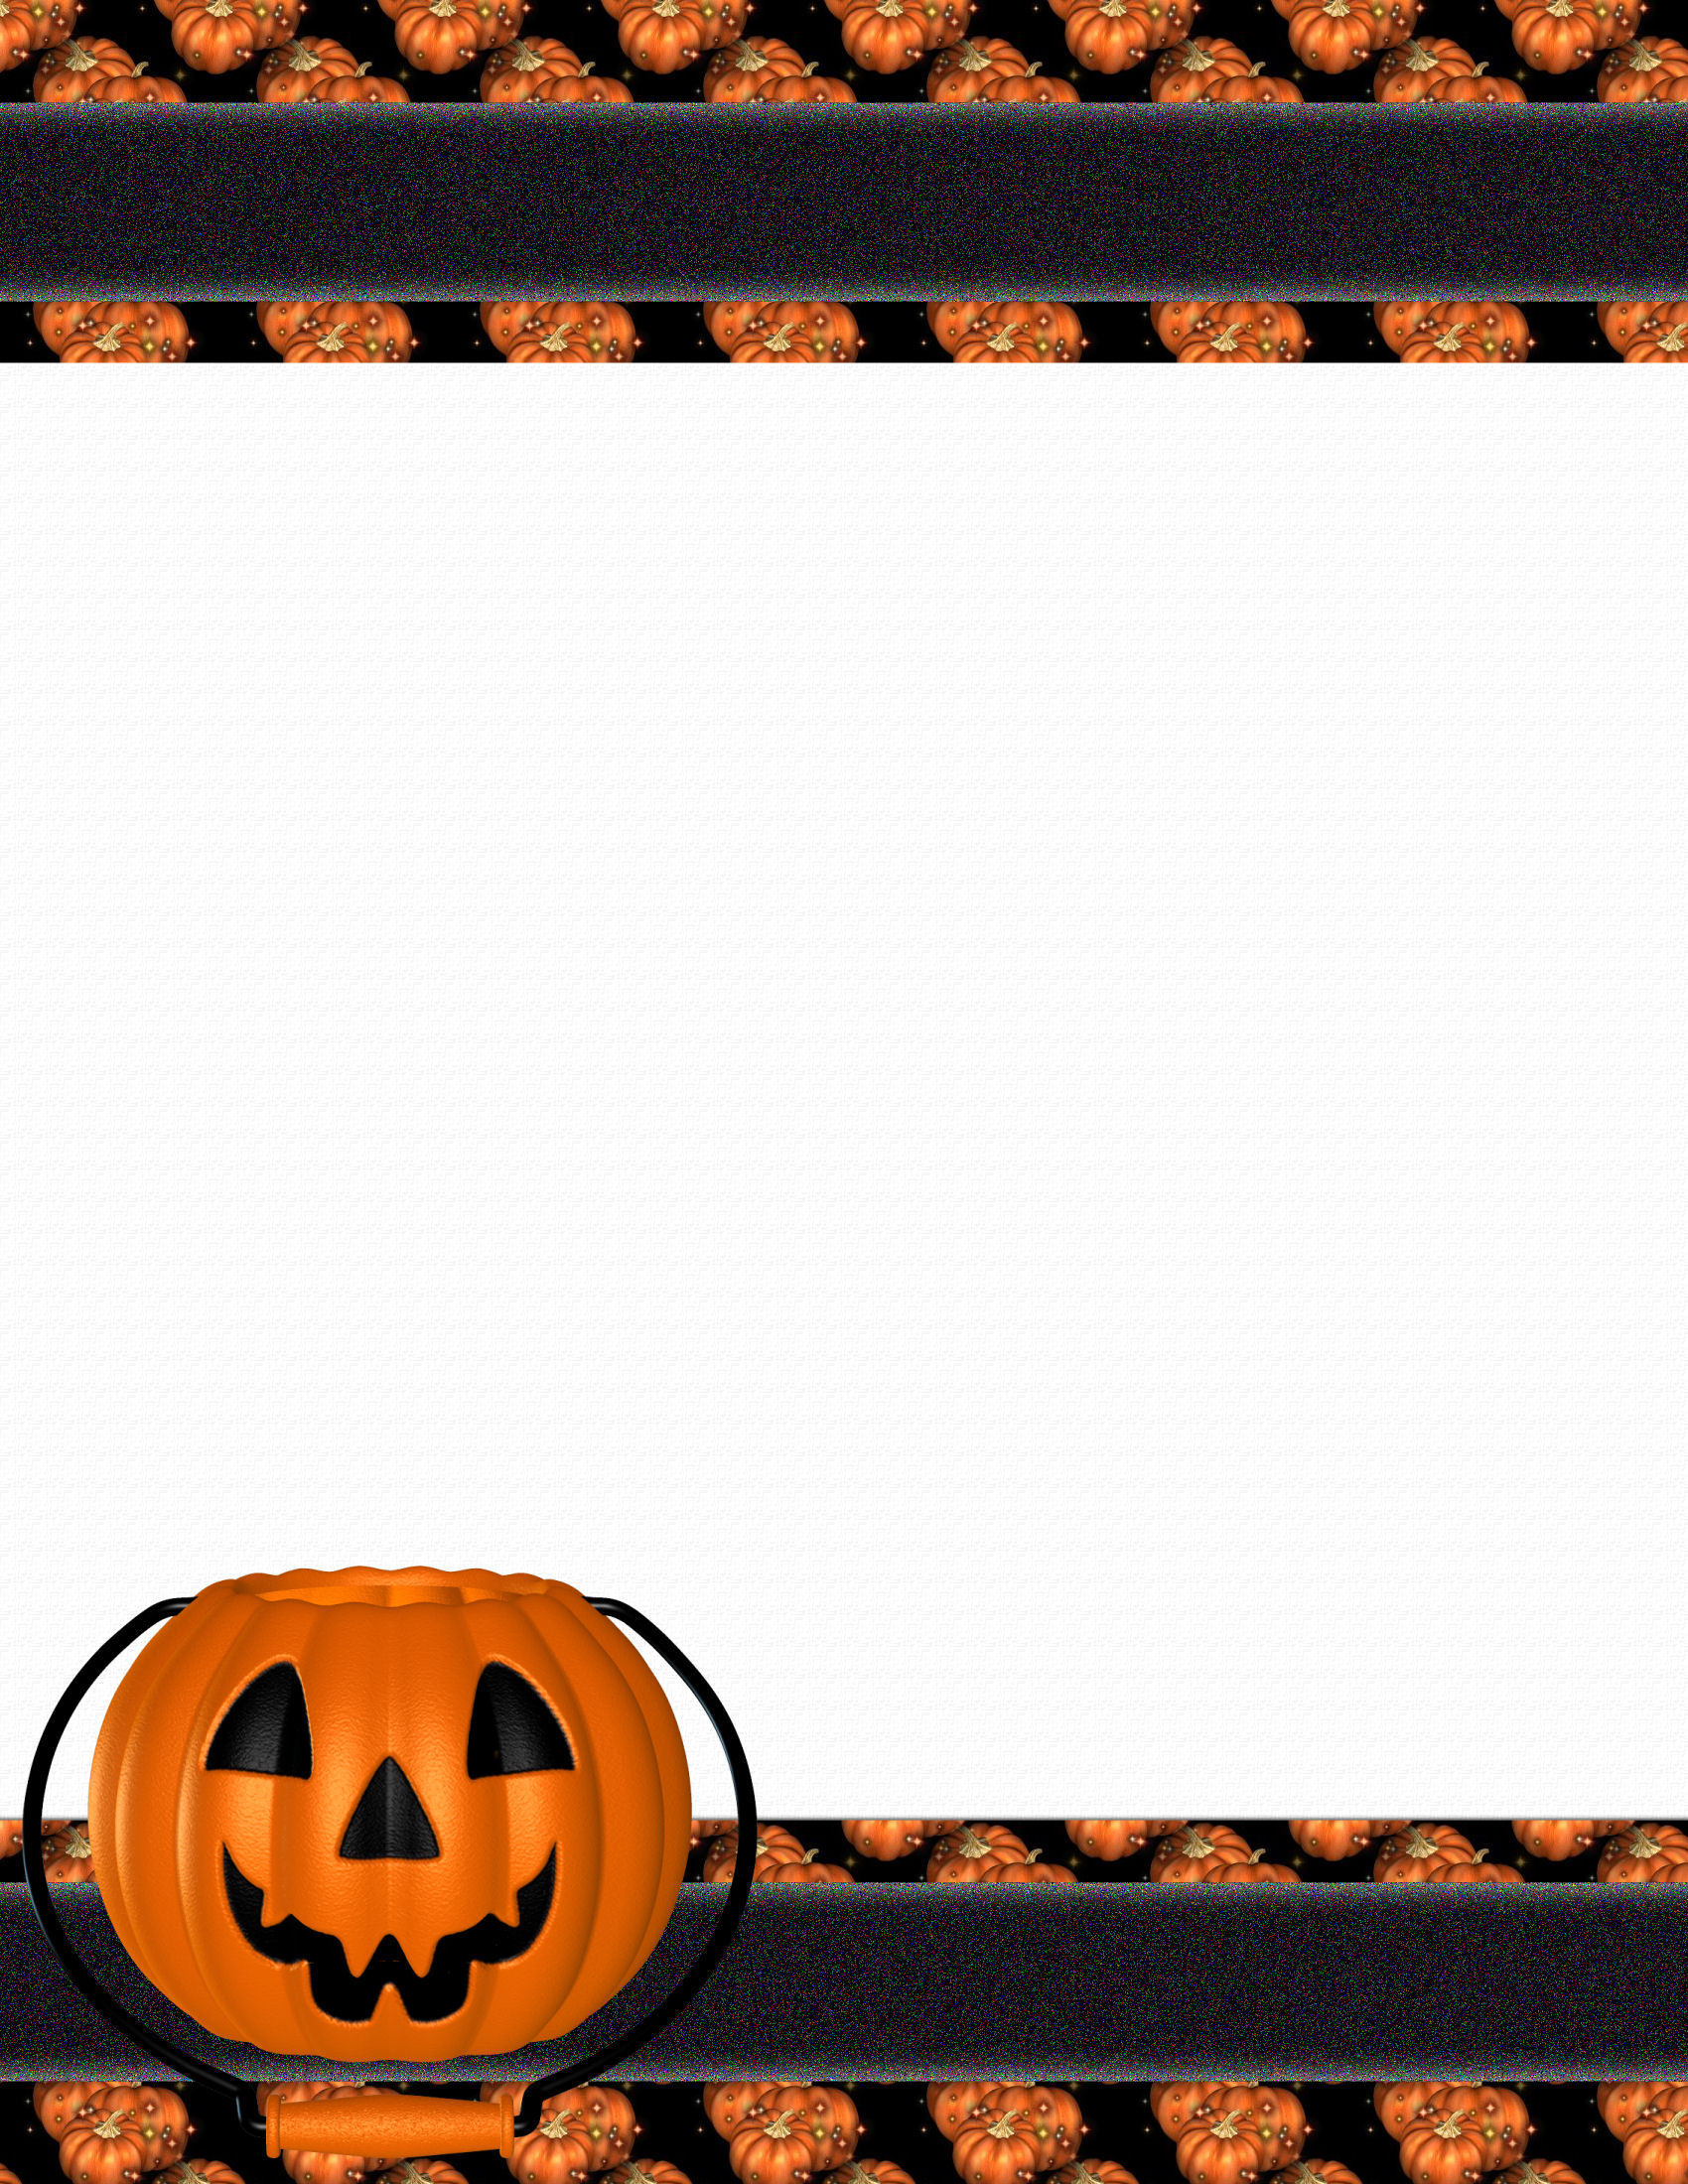 Halloween 2 FREE Stationery Template Downloads